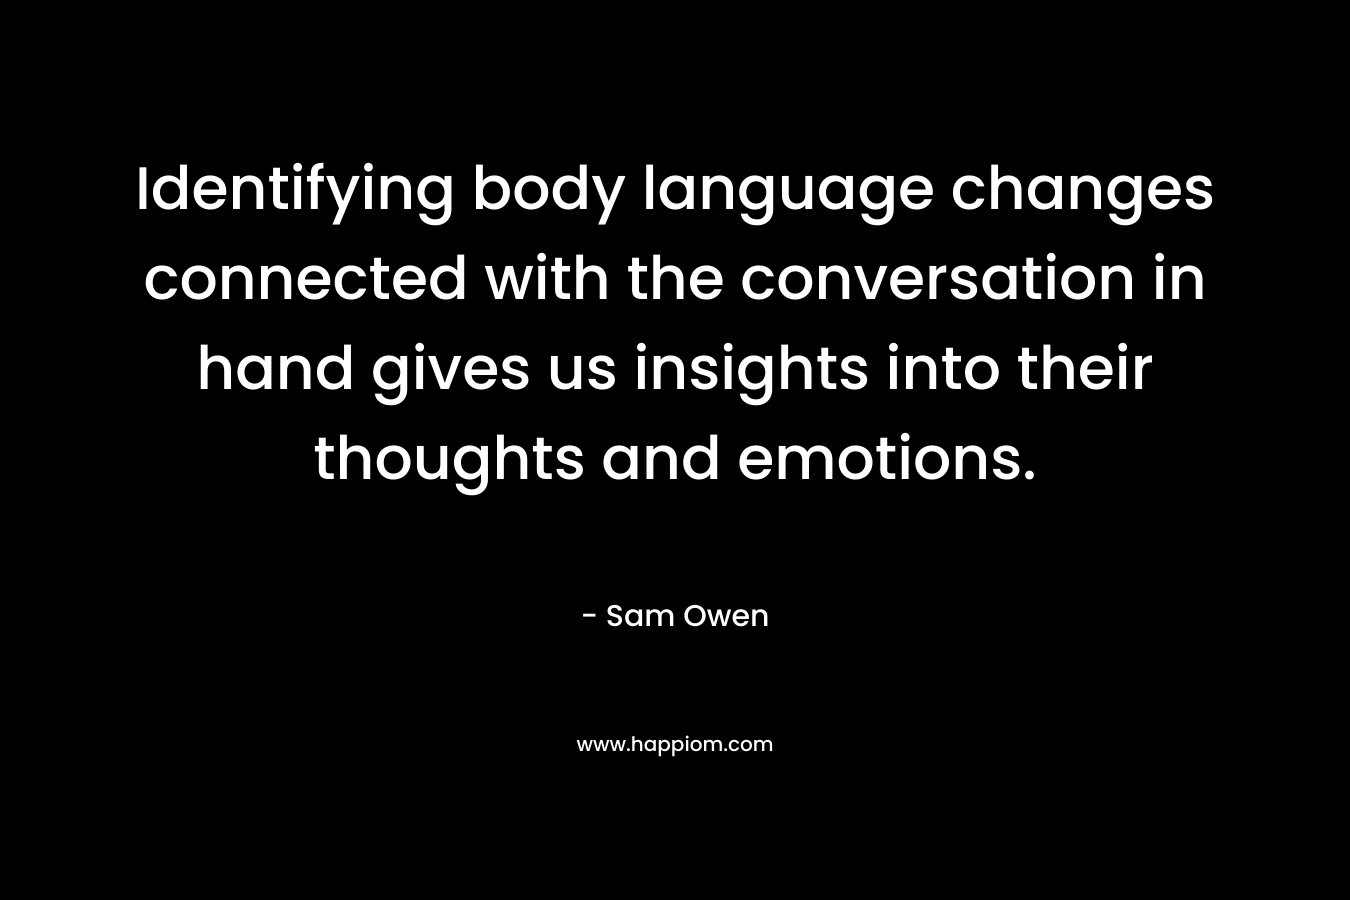 Identifying body language changes connected with the conversation in hand gives us insights into their thoughts and emotions. – Sam Owen